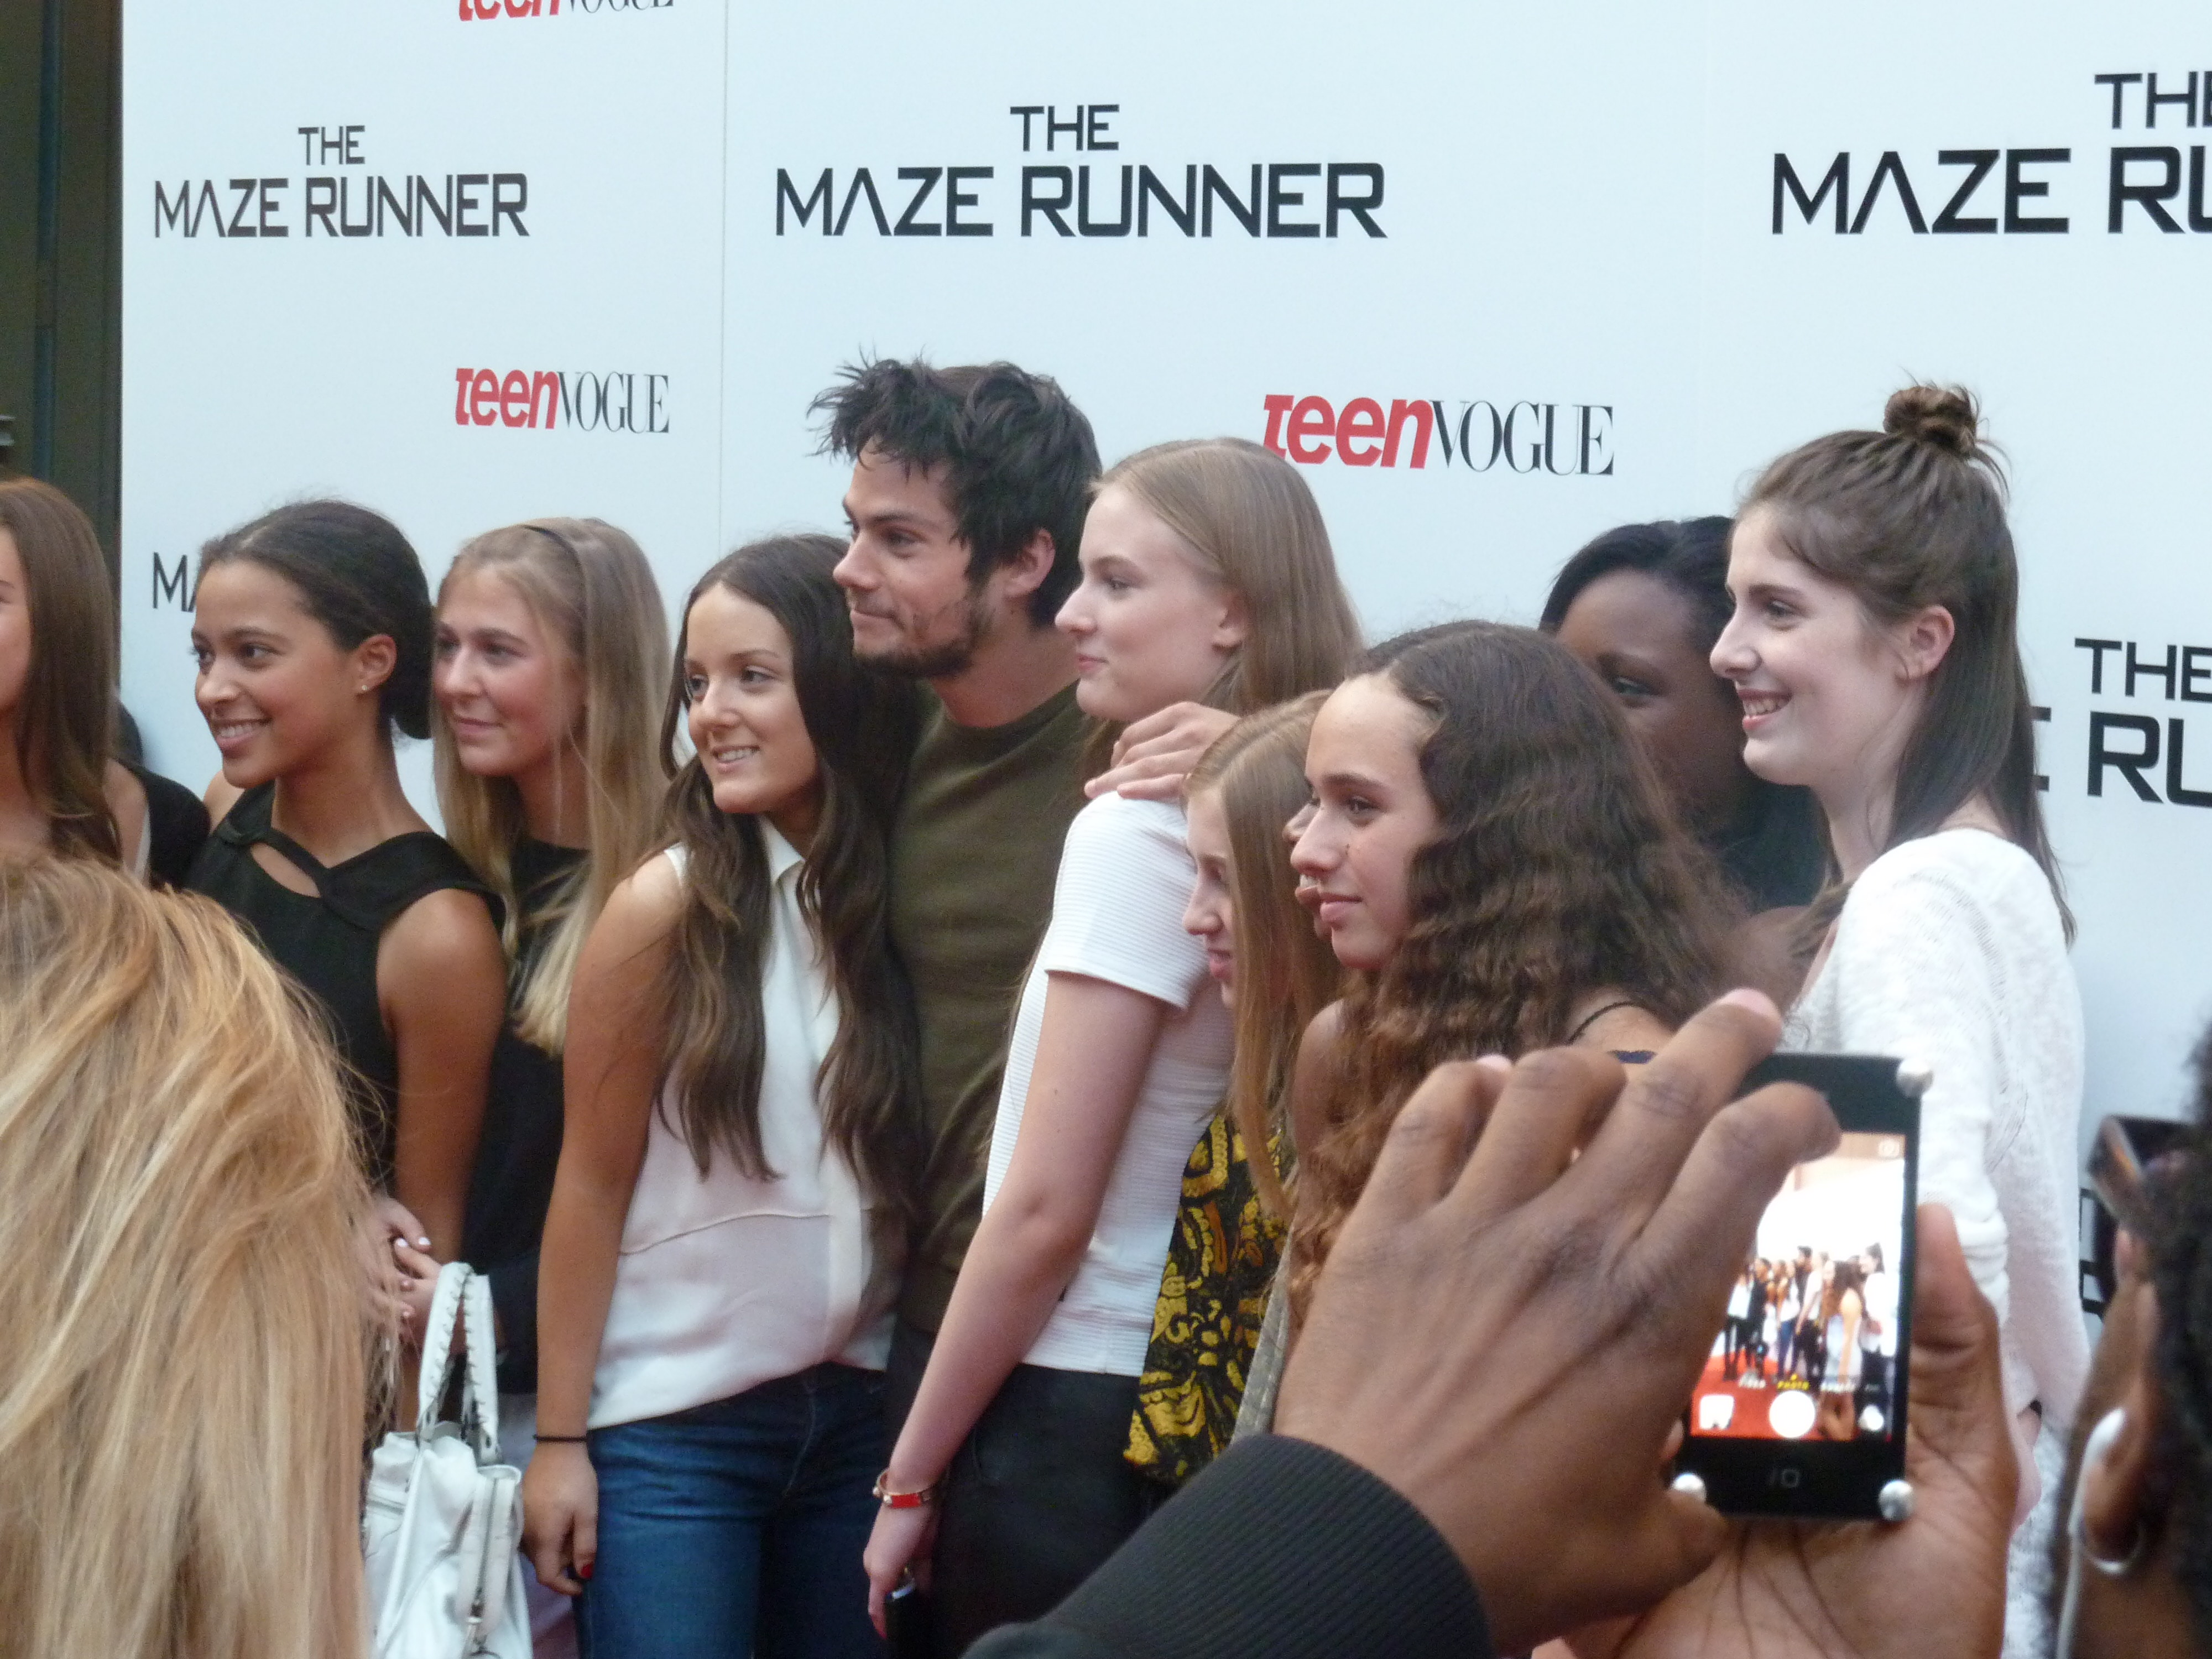 The Maze Runner in NYC